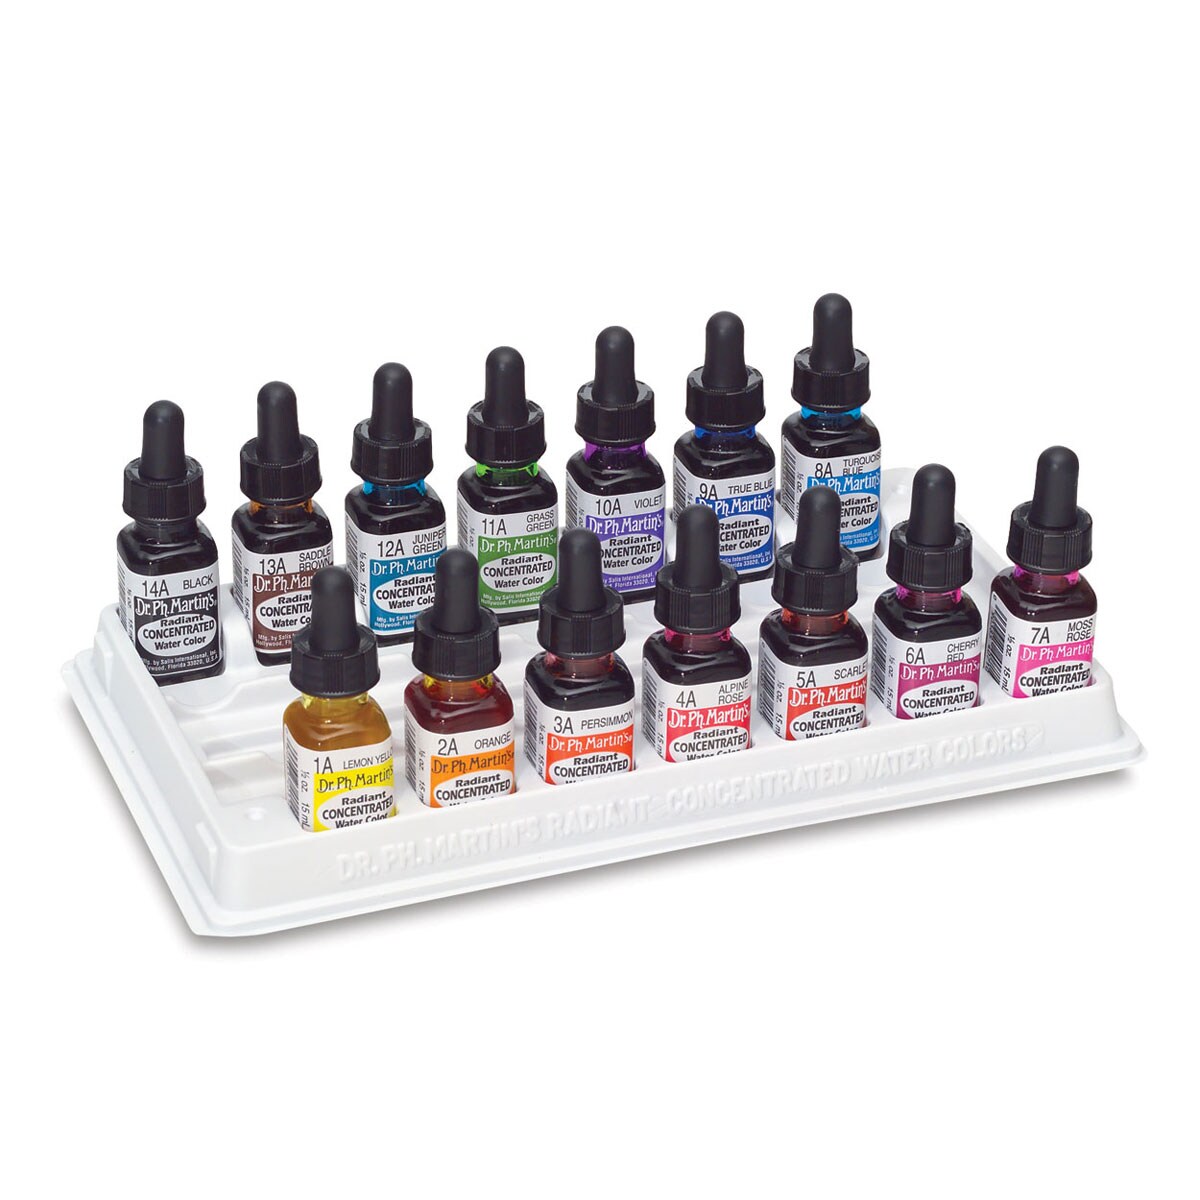 Dr. Ph. Martin&#x27;s Radiant Concentrated Watercolor Set - 1/2 oz, Set of 14, Assorted, Set A